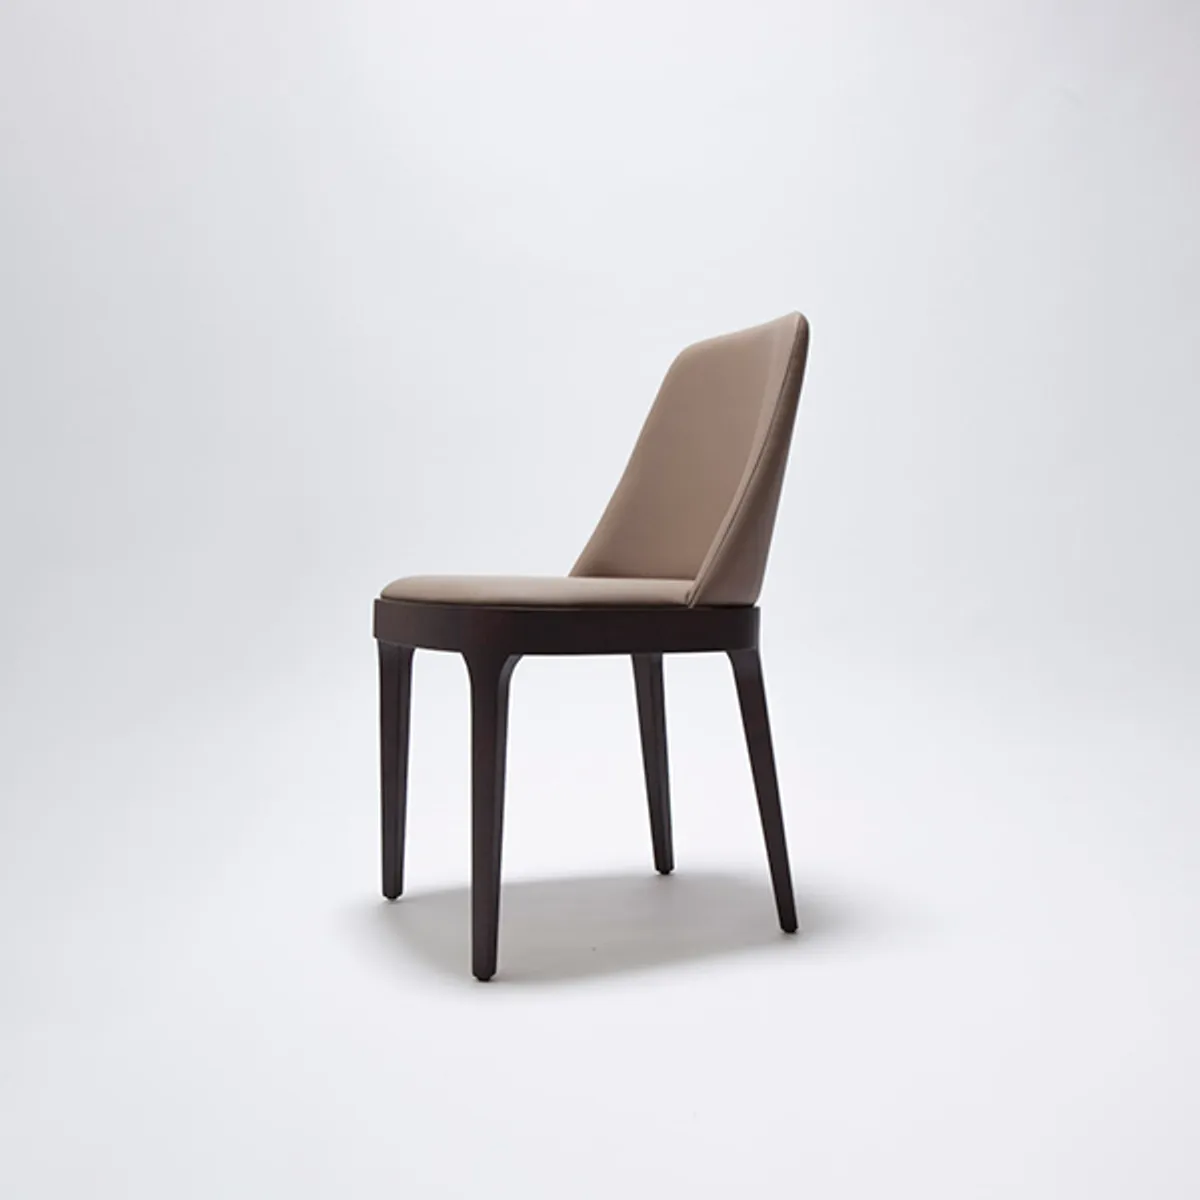 Candor Side Chair 8469 Inside Out Contracts